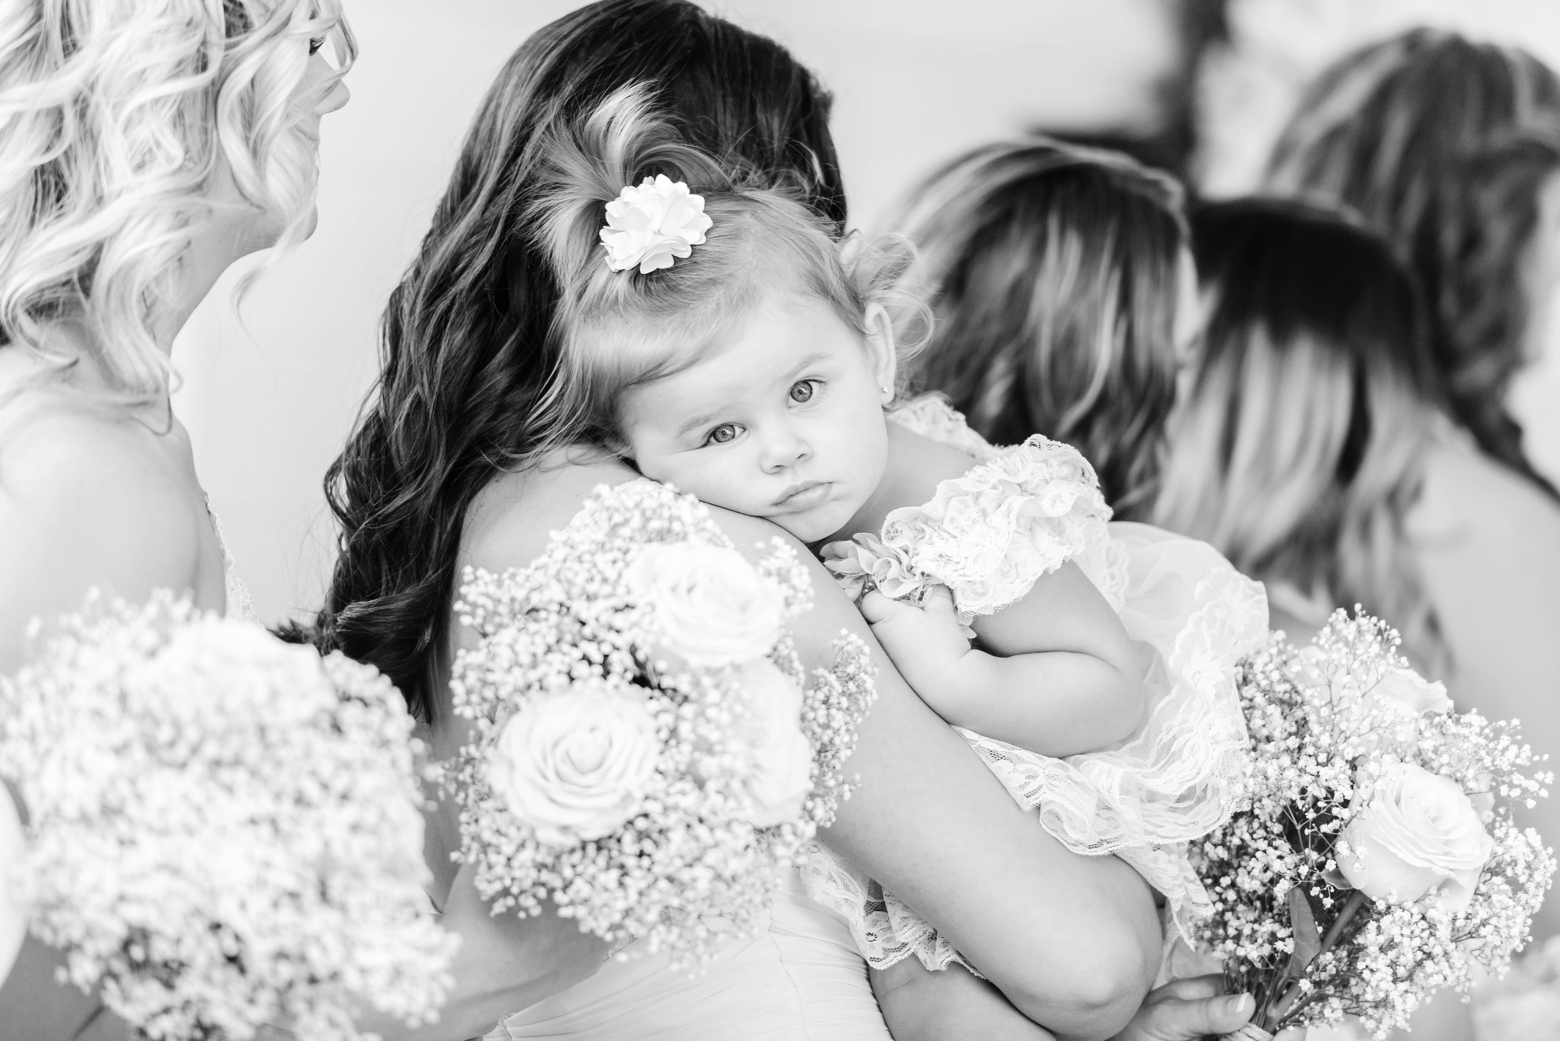 Bridesmaid hold the flower girl in timeless black and white photography